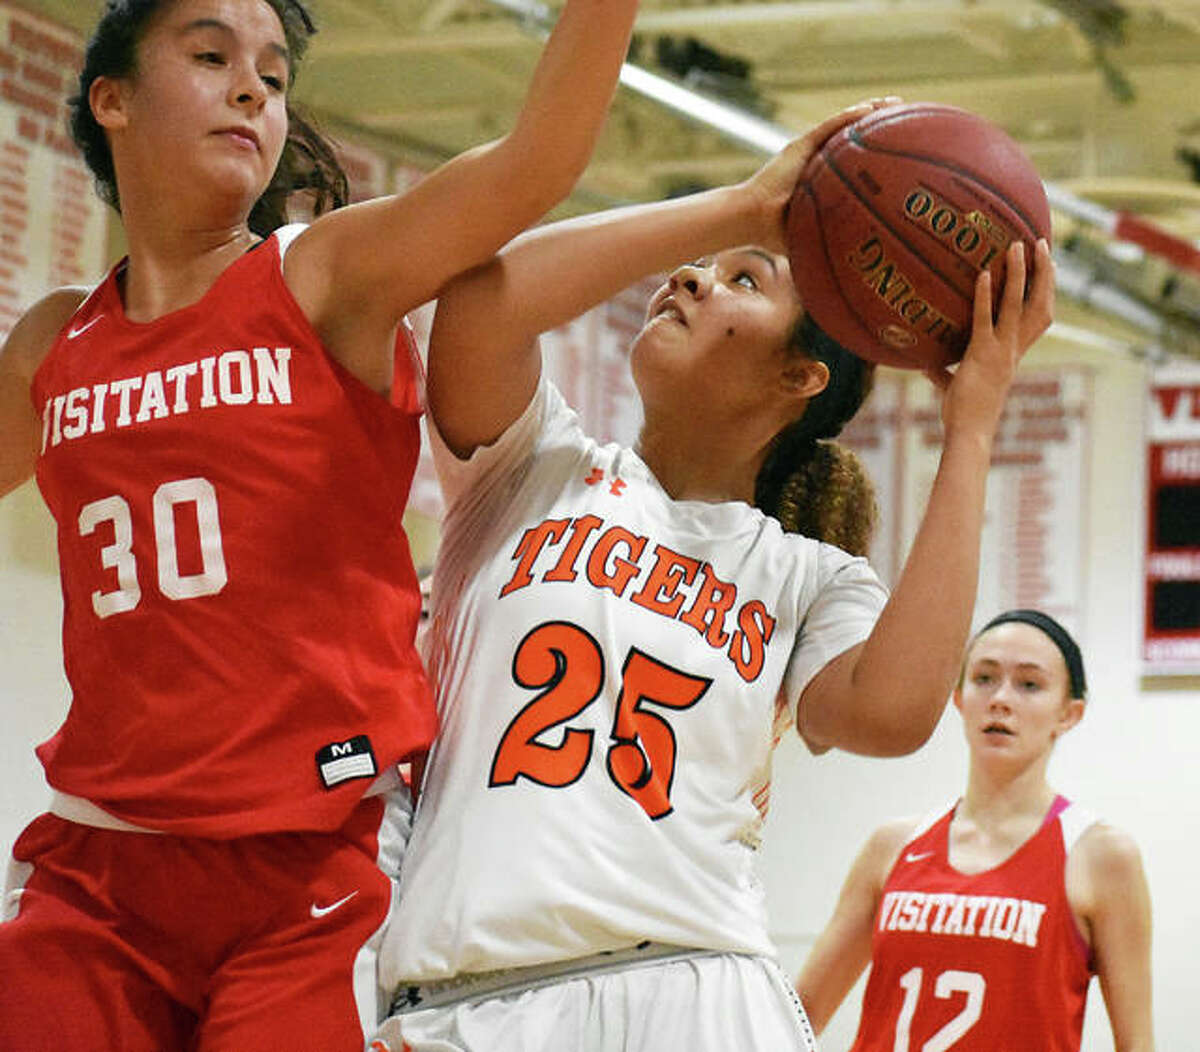 Edwardsville forward Sydney Harris, right, is fouled as she goes up for a shot in the first half of Saturday’s game in the Visitation Christmas Tournament.